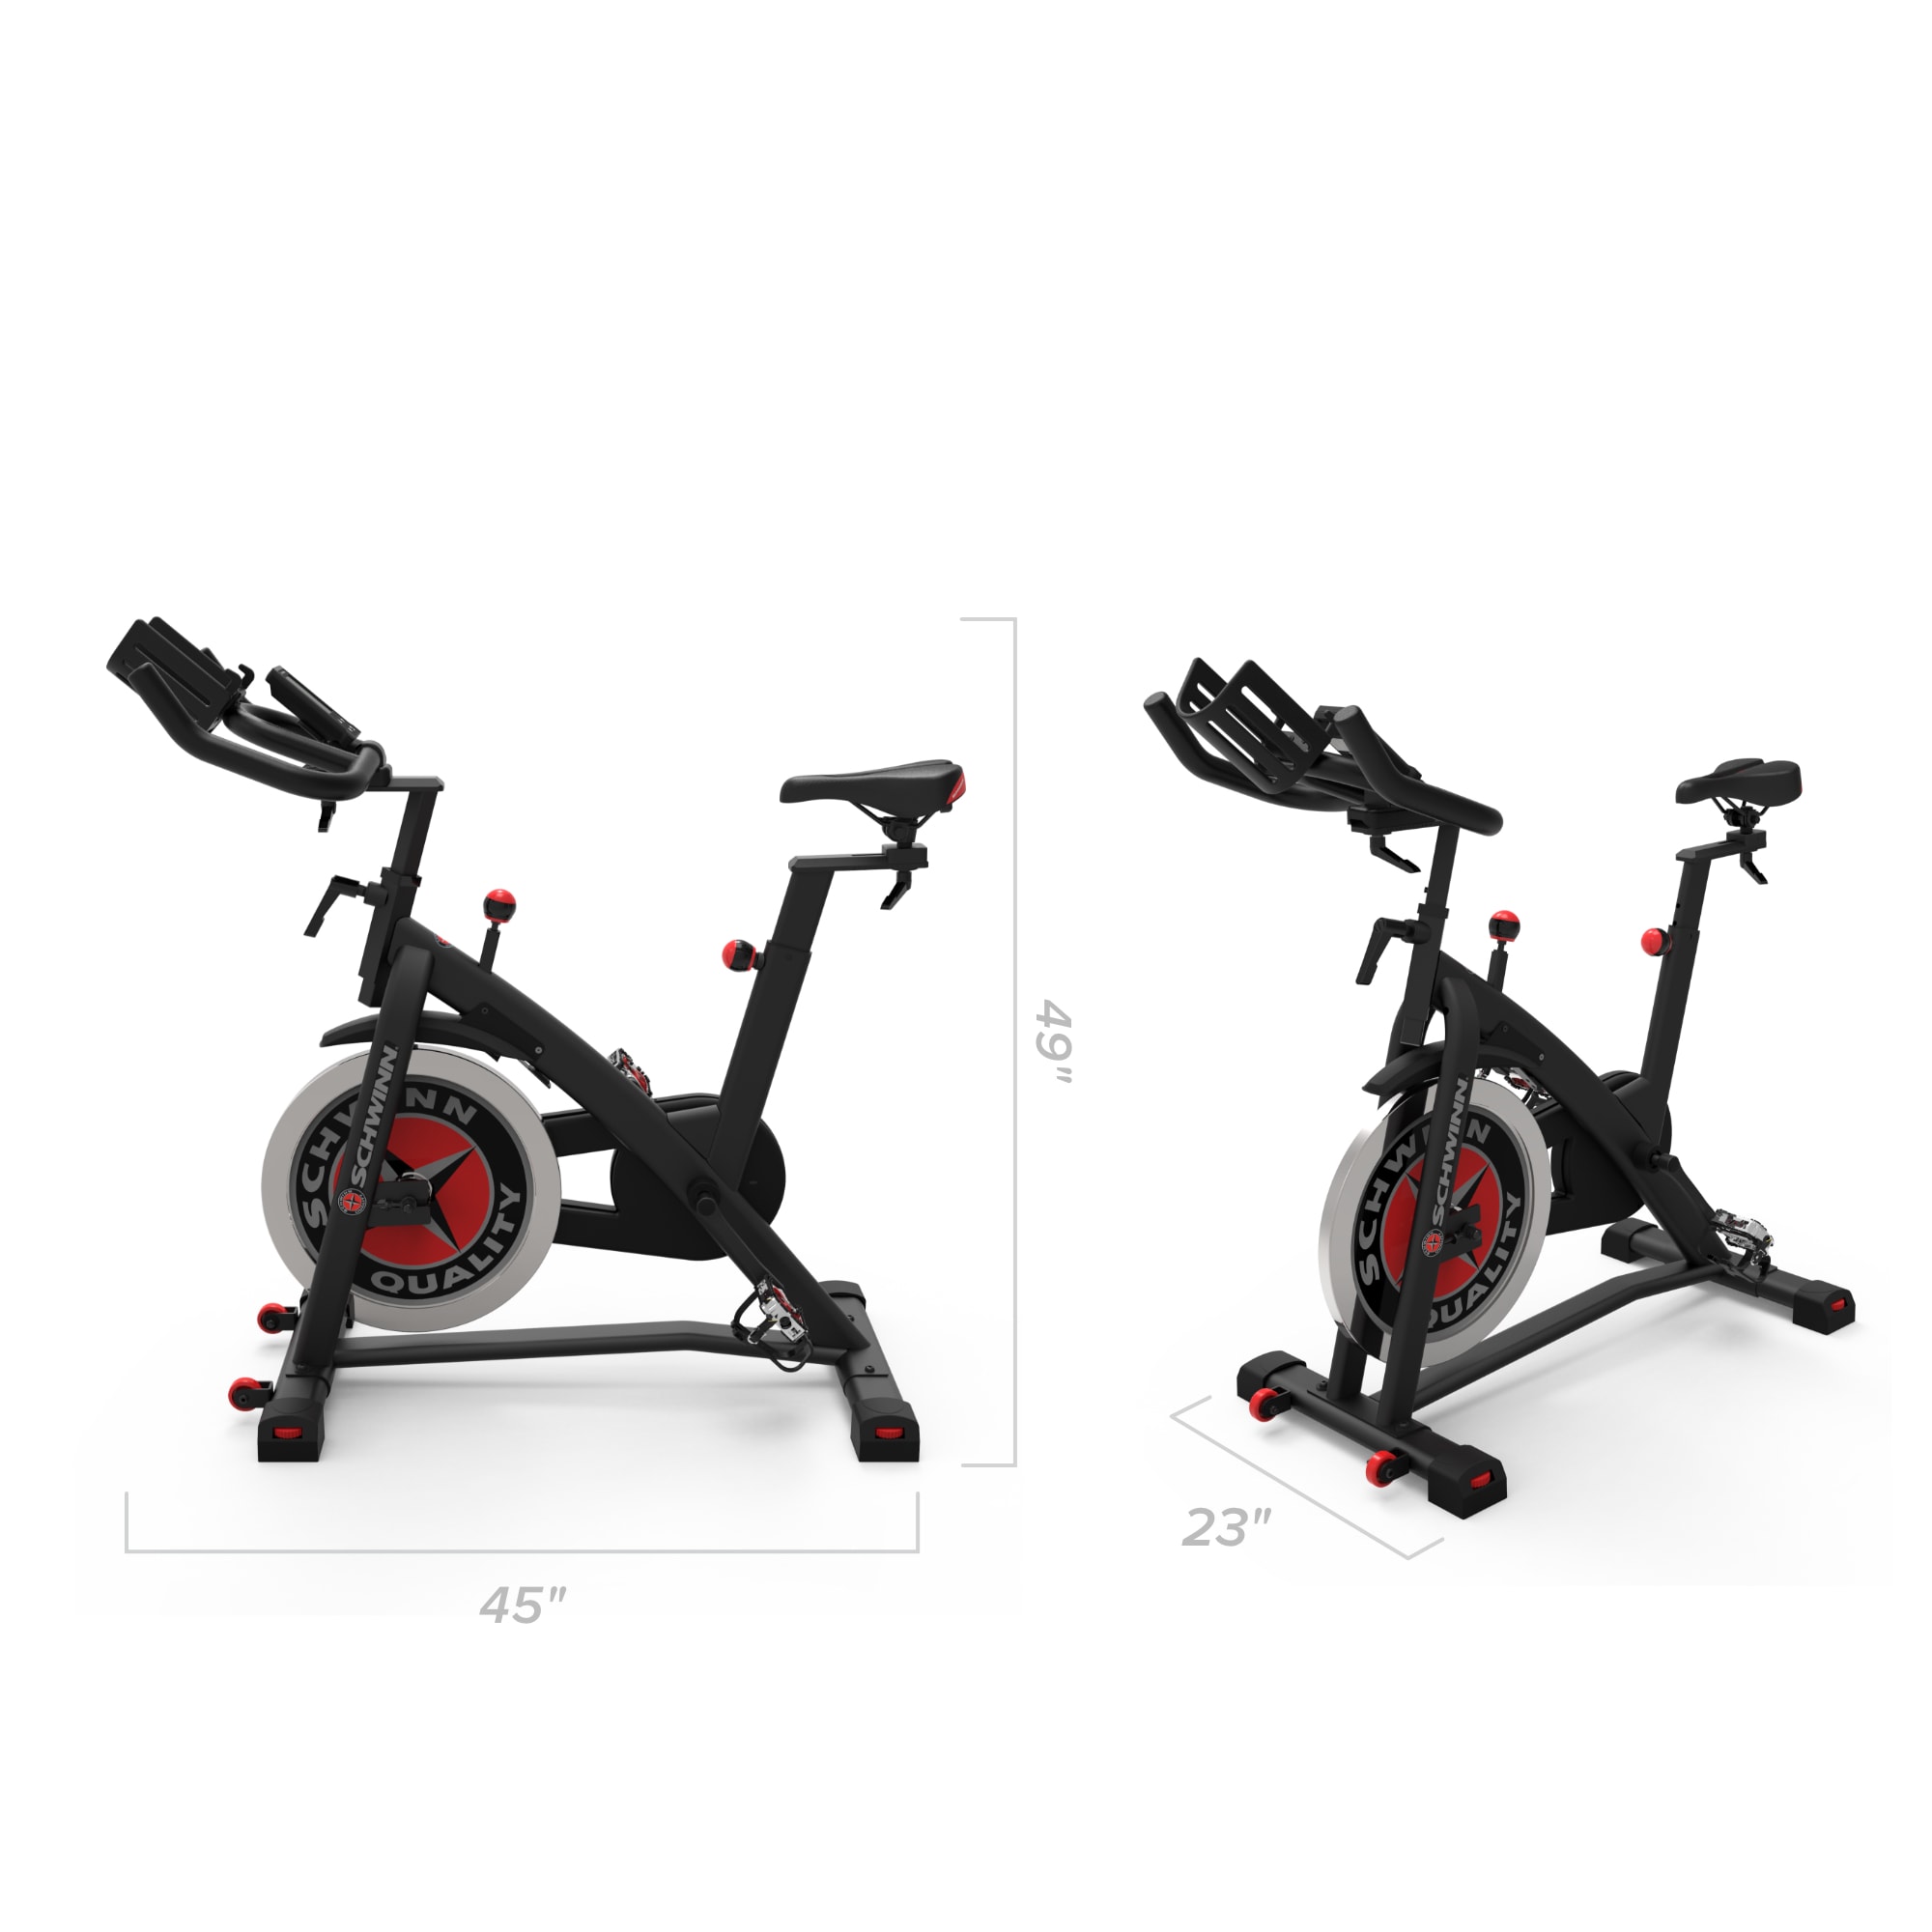 IC3 Bike - The Indoor Cycling Exercise Bike For Your Home Gym